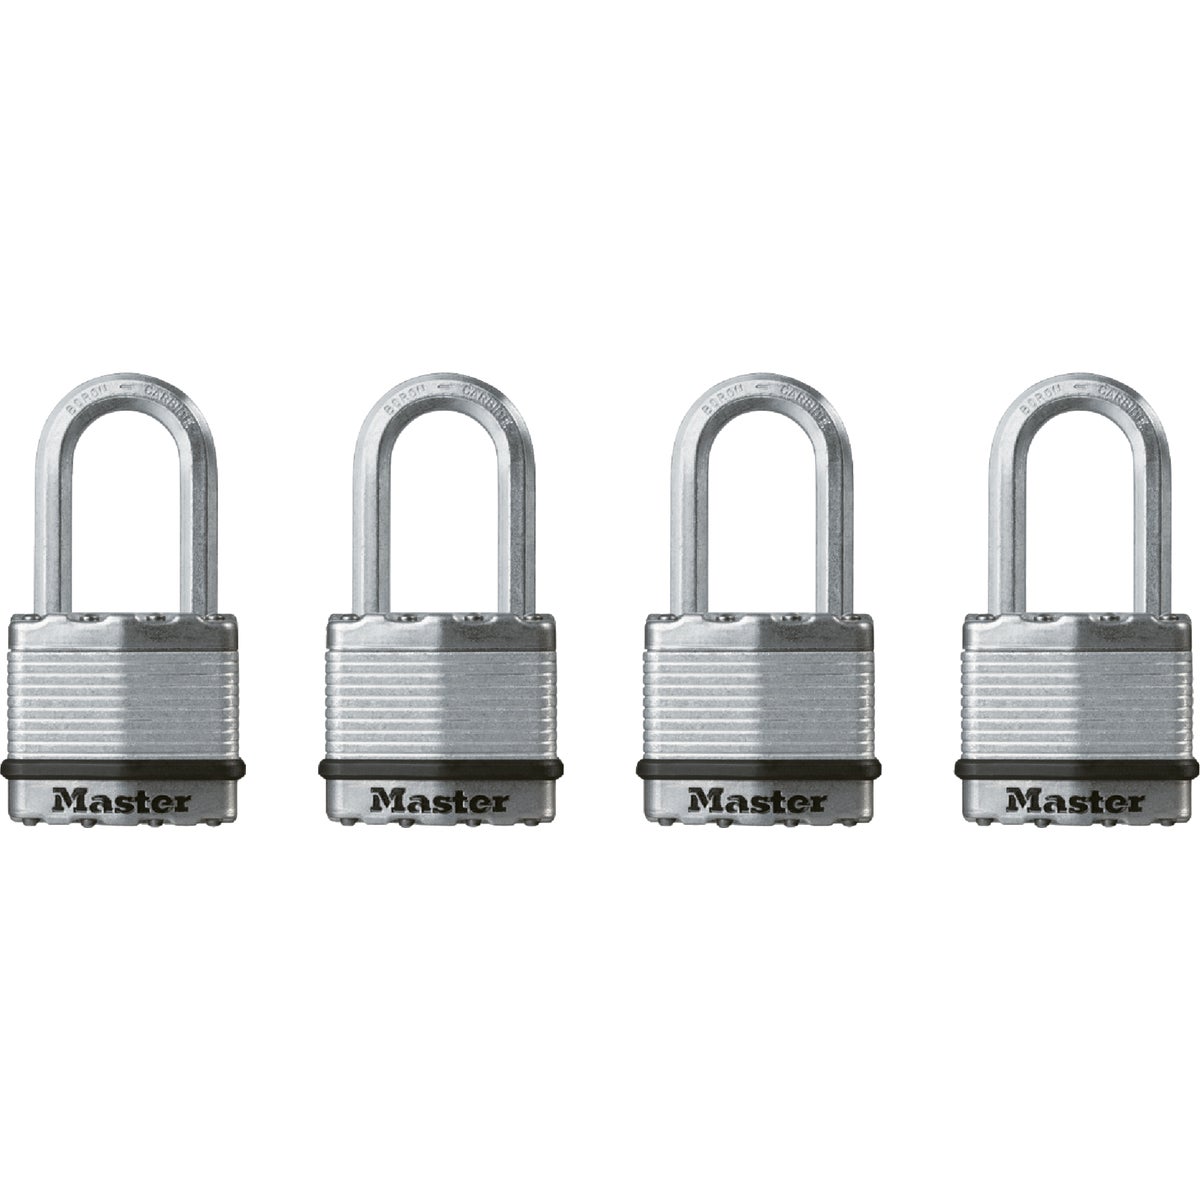 Master Lock Magnum 1-3/4 In. W. Dual-Armor Keyed Alike Padlock with 1-1/2 In. L. Shackle (4-Pack)